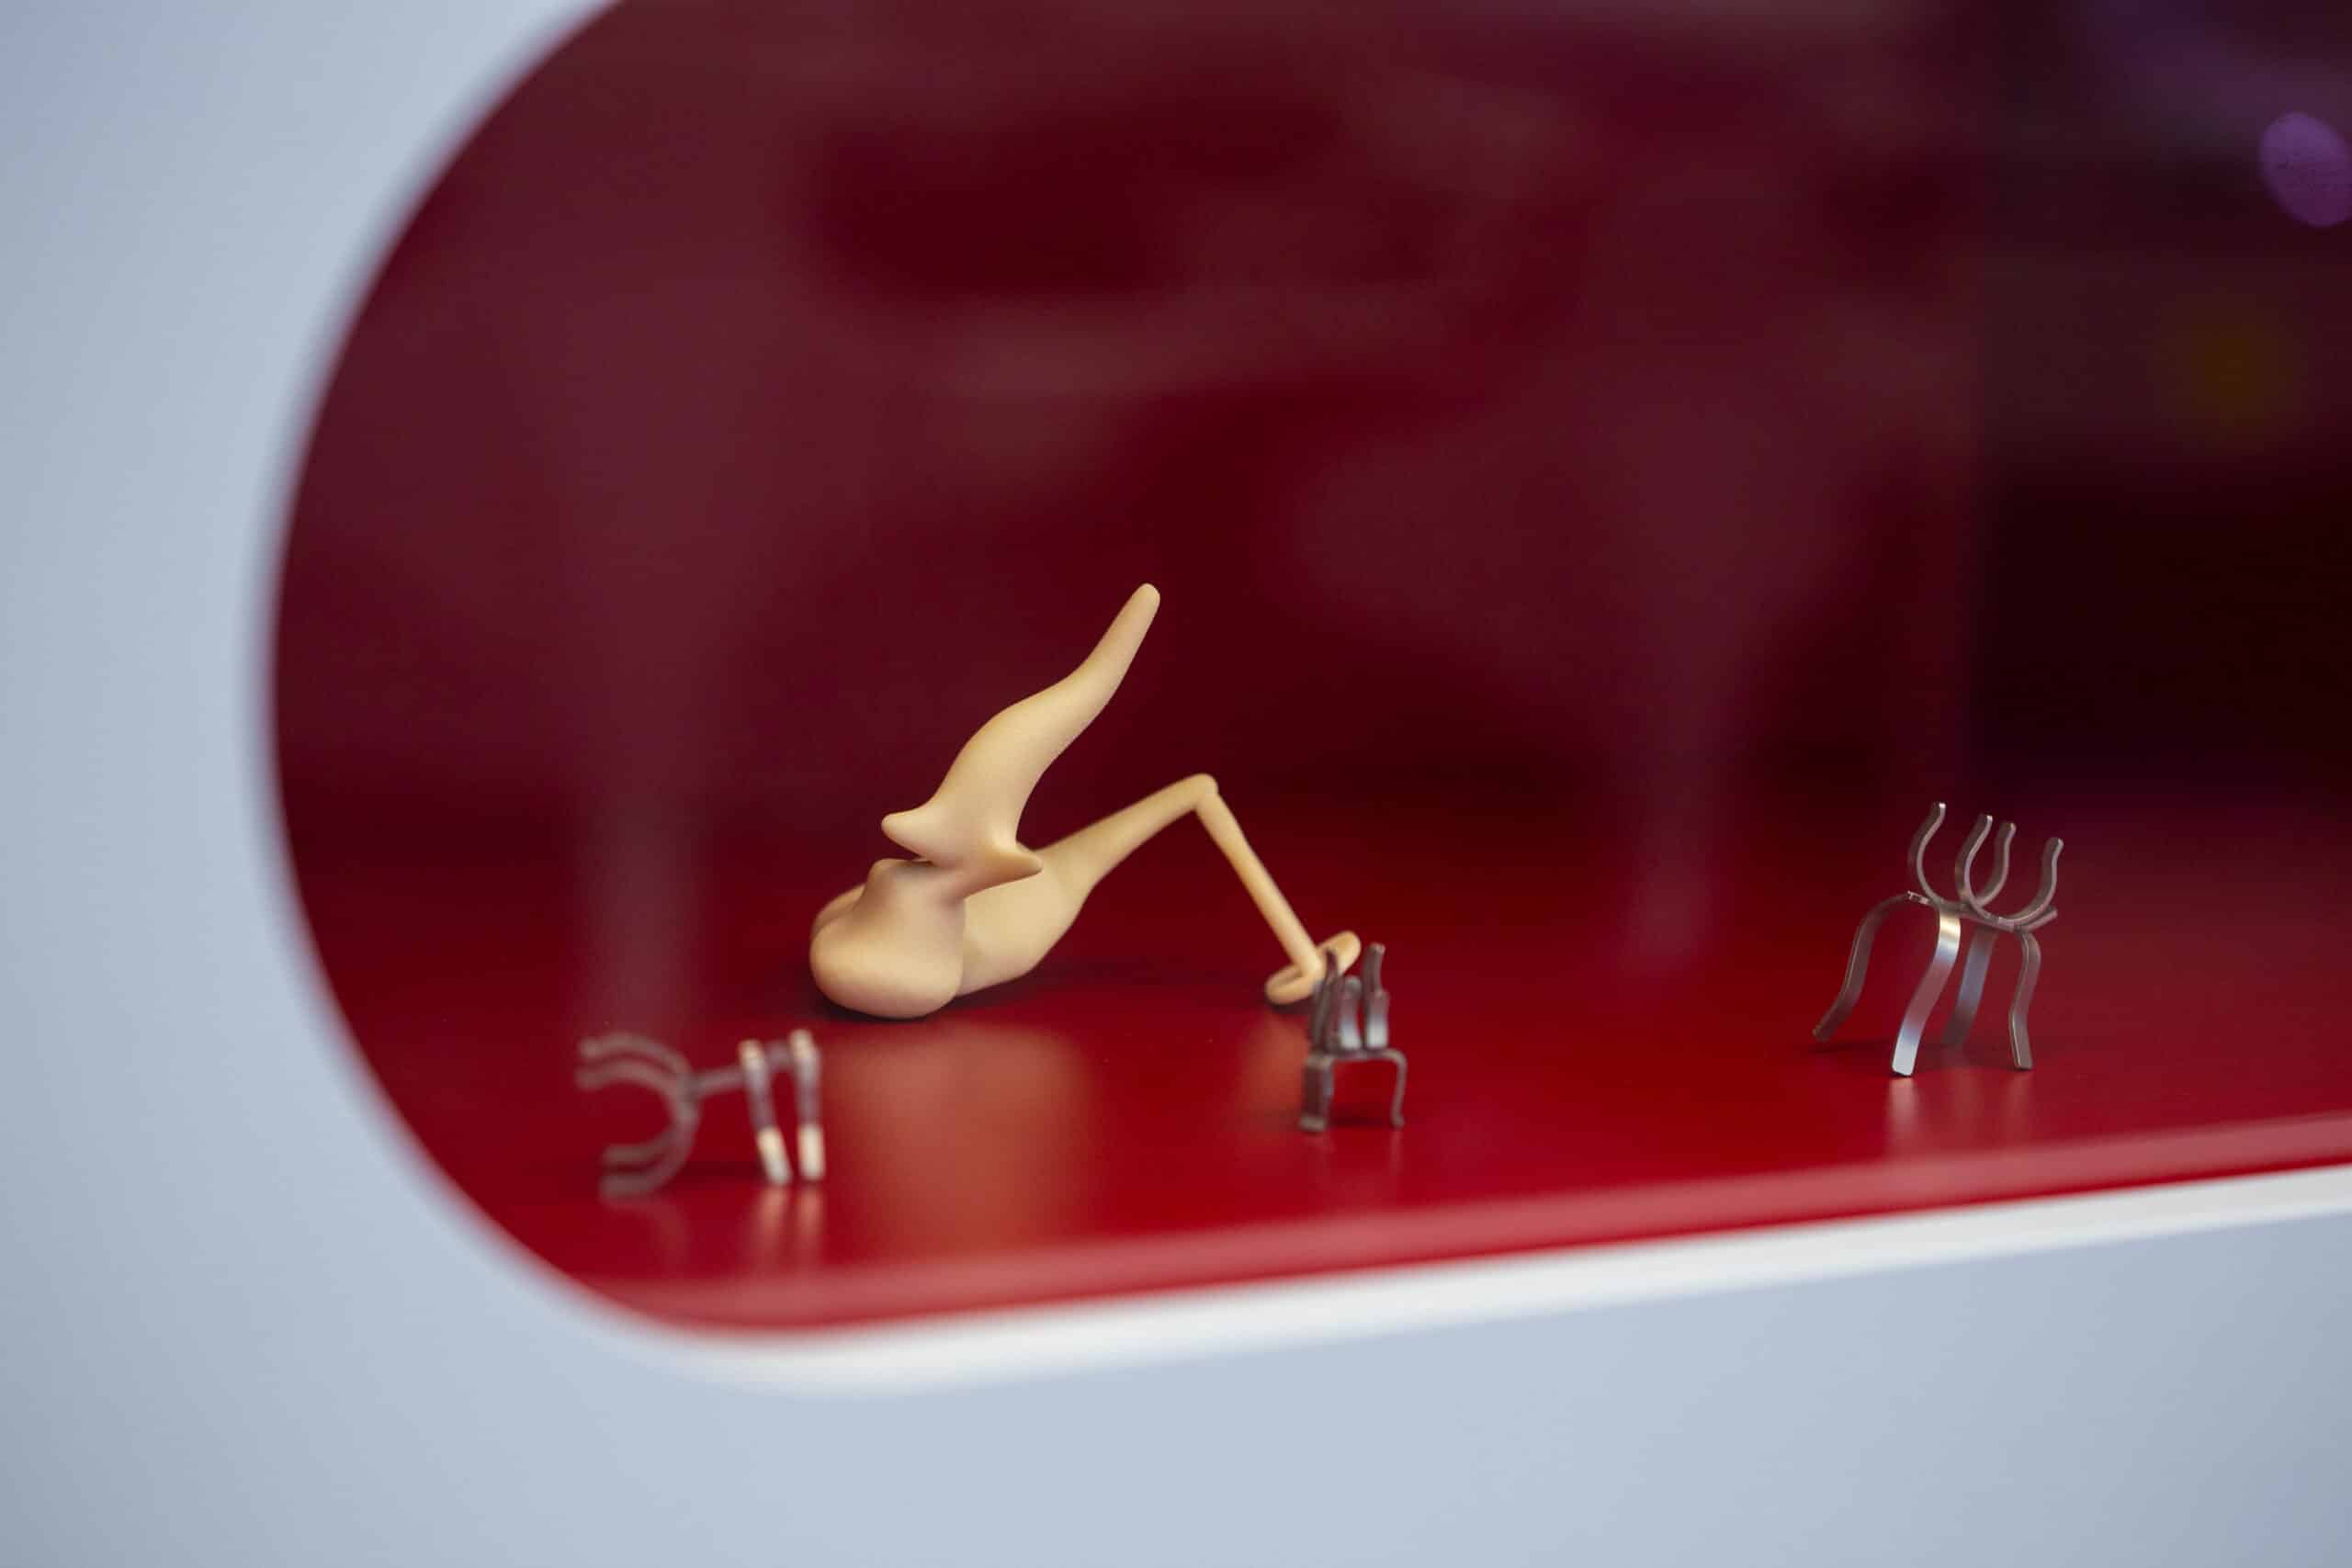 Passive middle ear implants on display